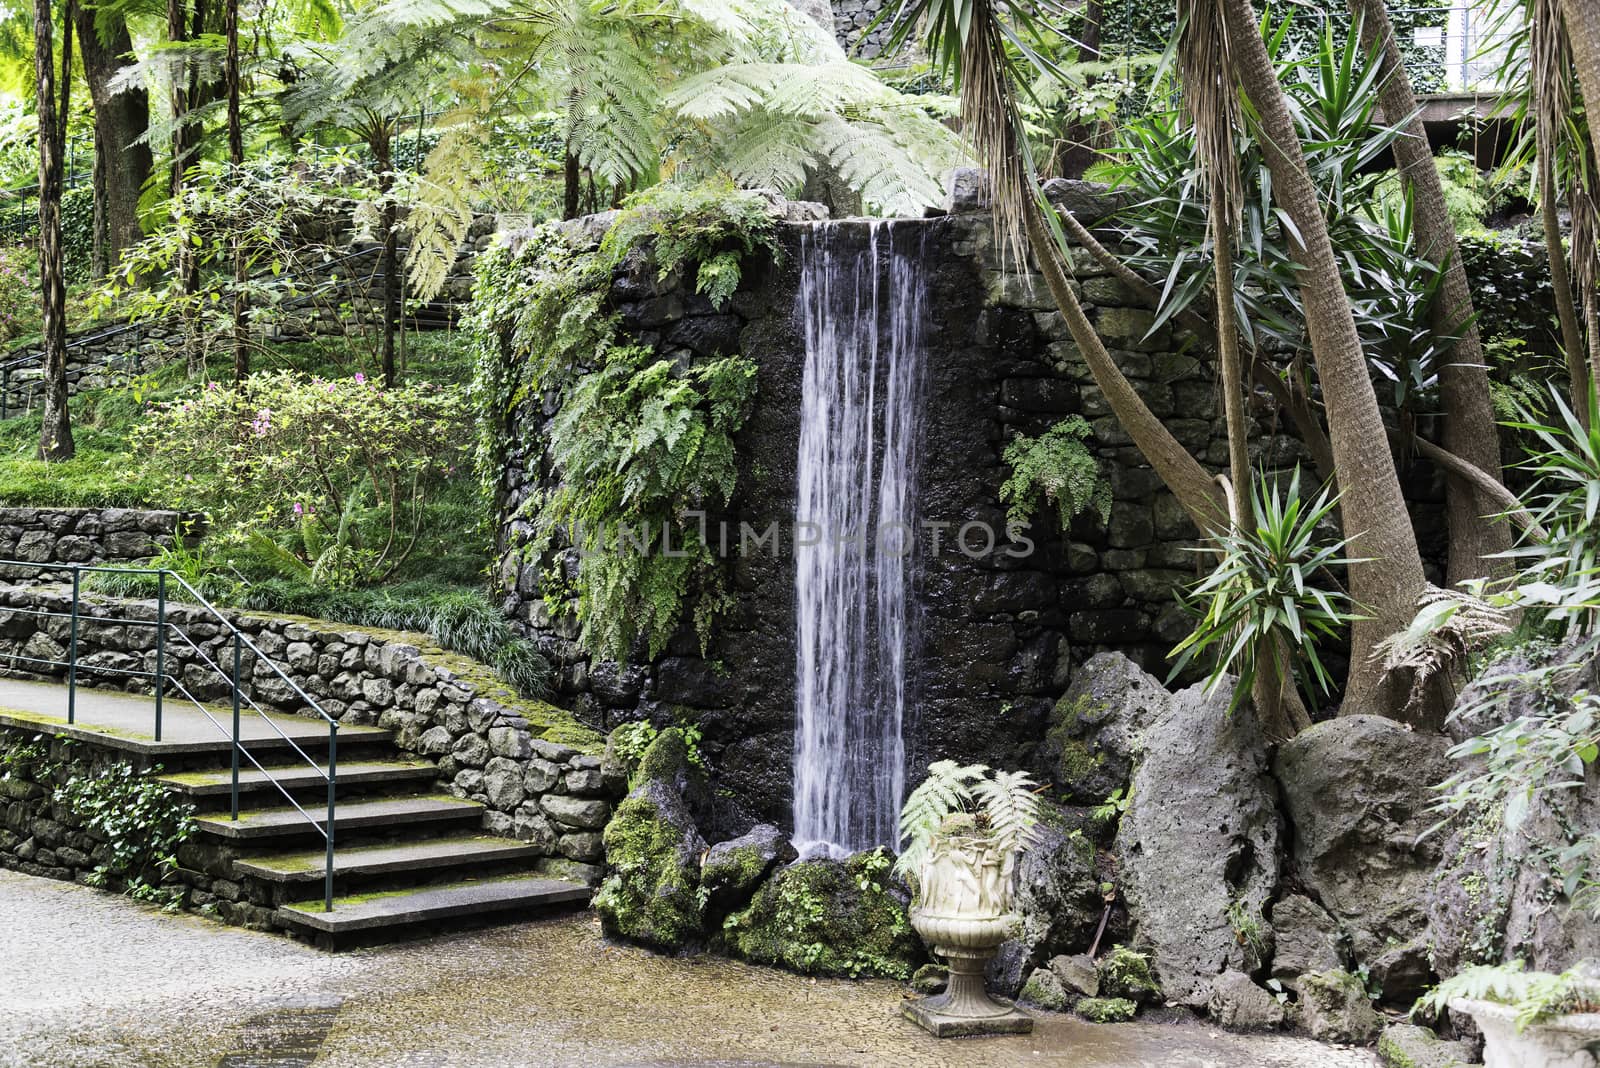 Waterfall in the tropican Monte Palace Garden. Funchal, Madeira, Portugal.